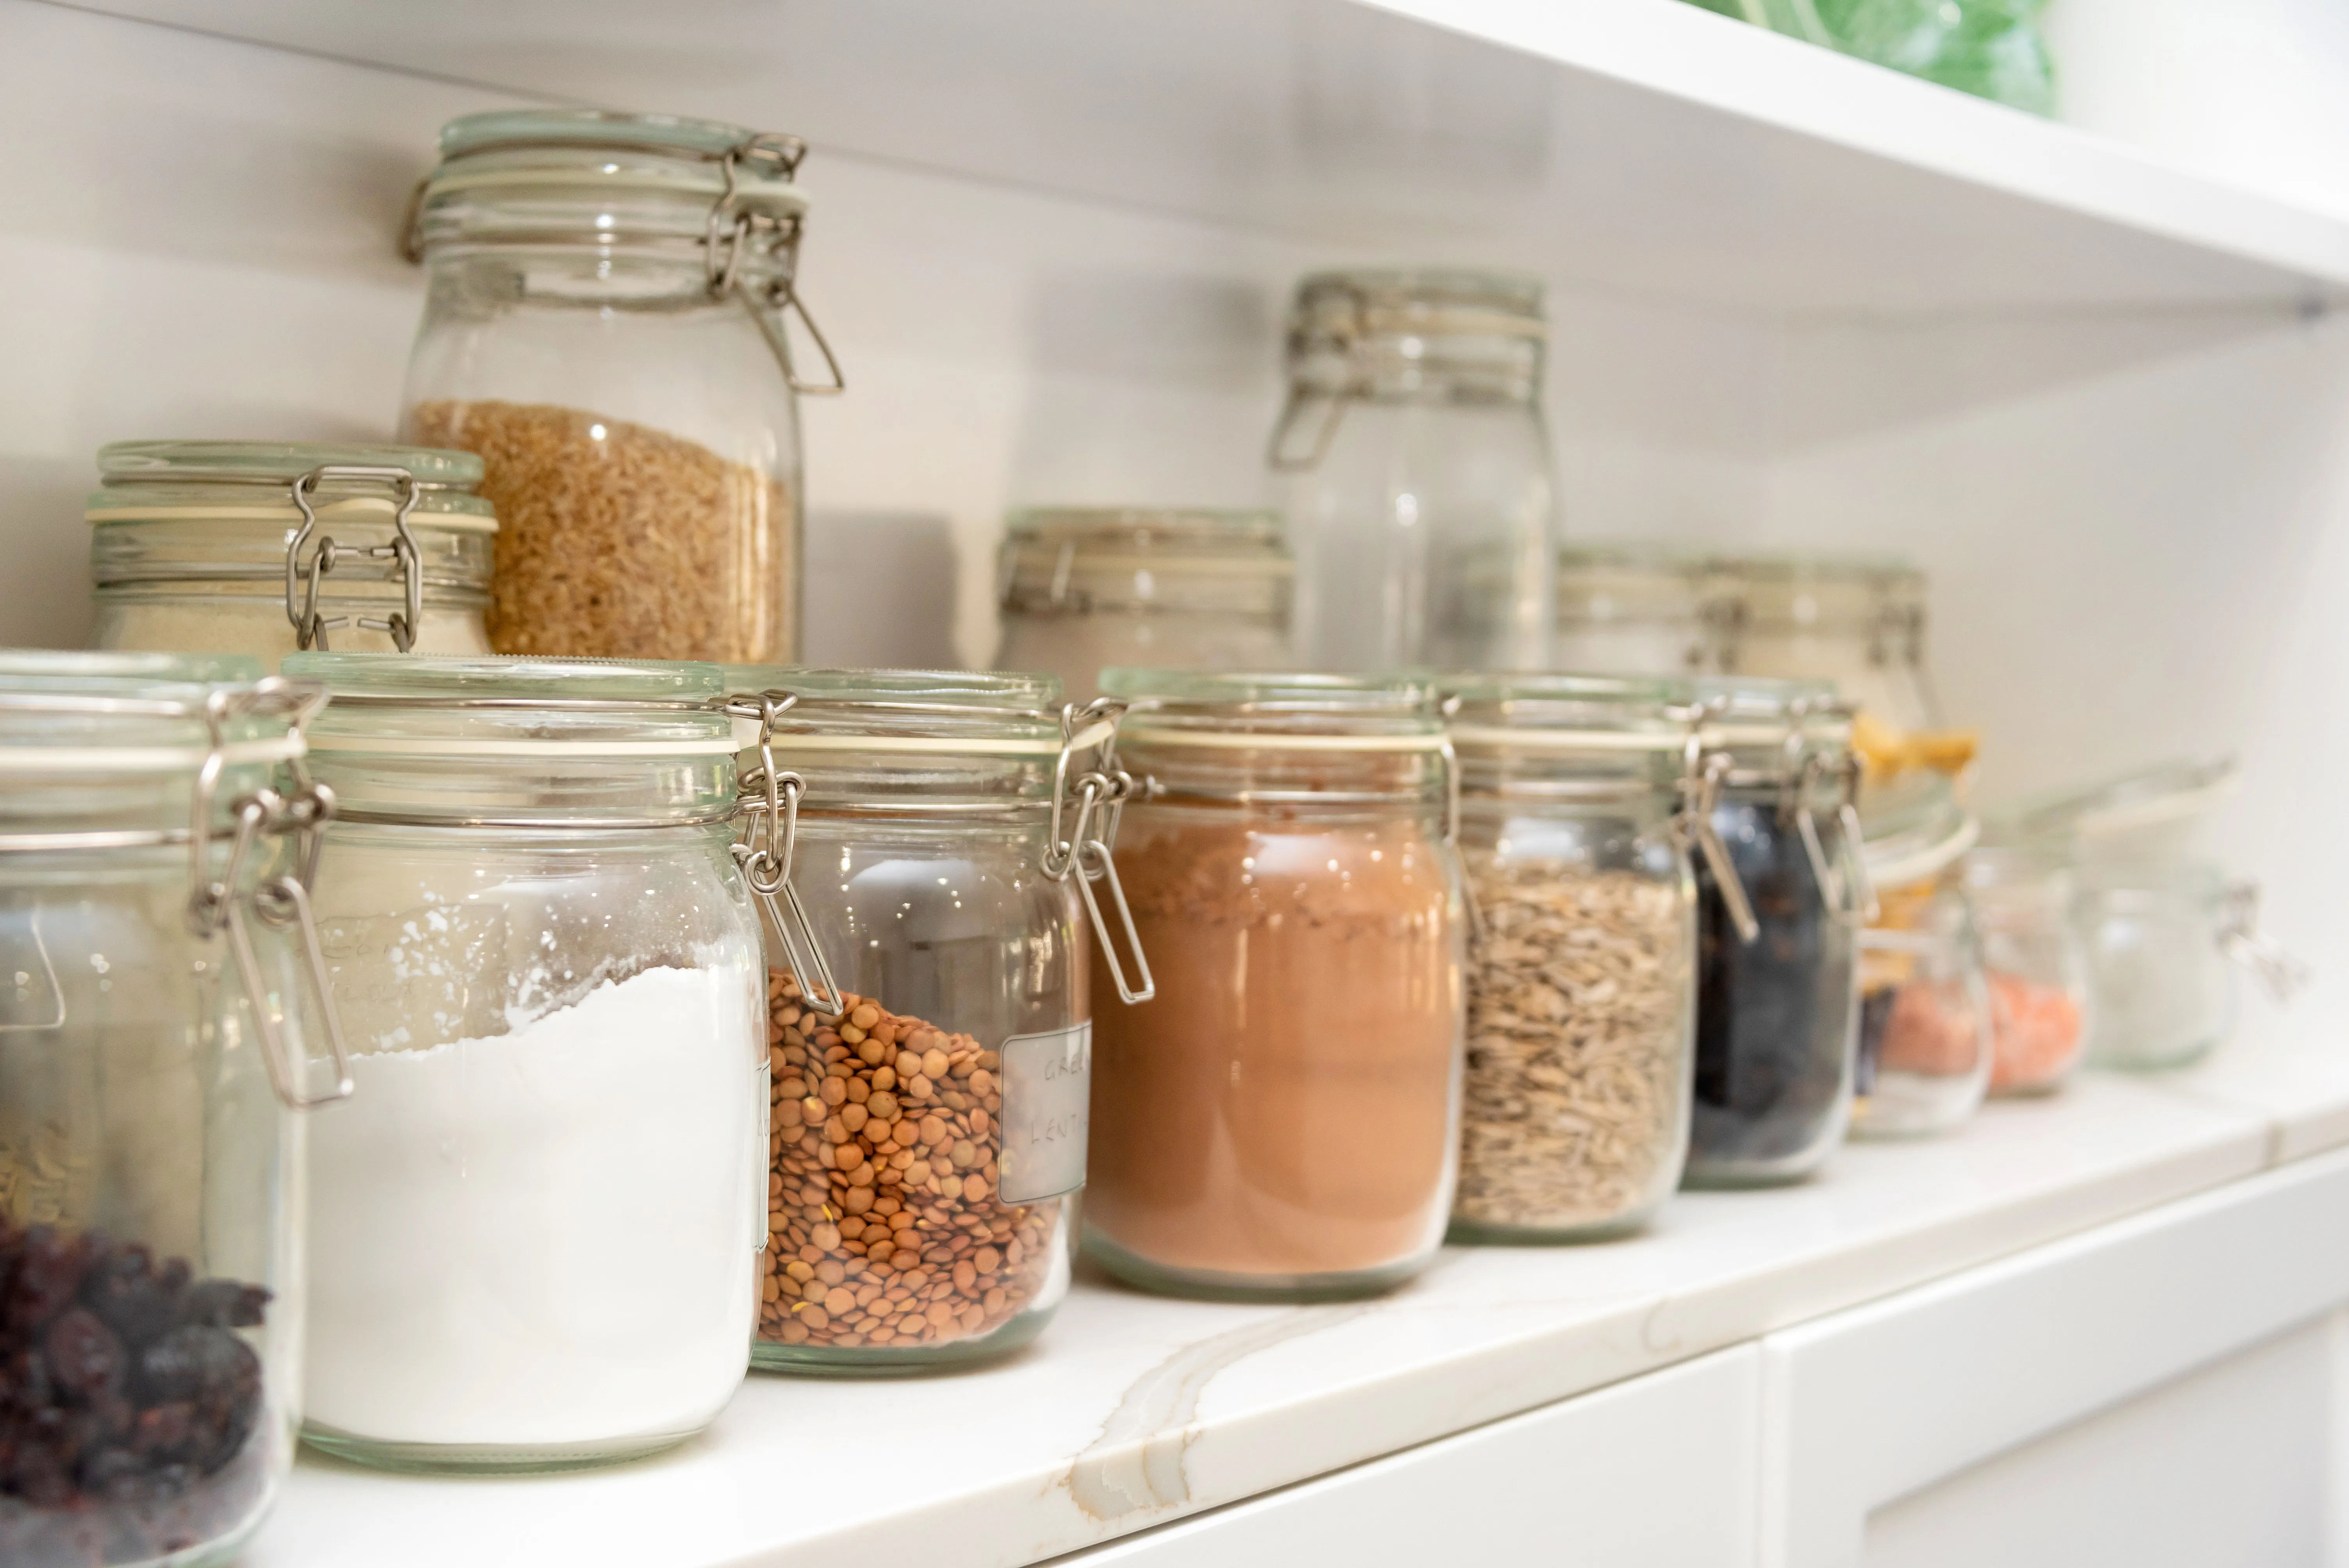 Beans and lentils decanted in mason jars on a shelf.